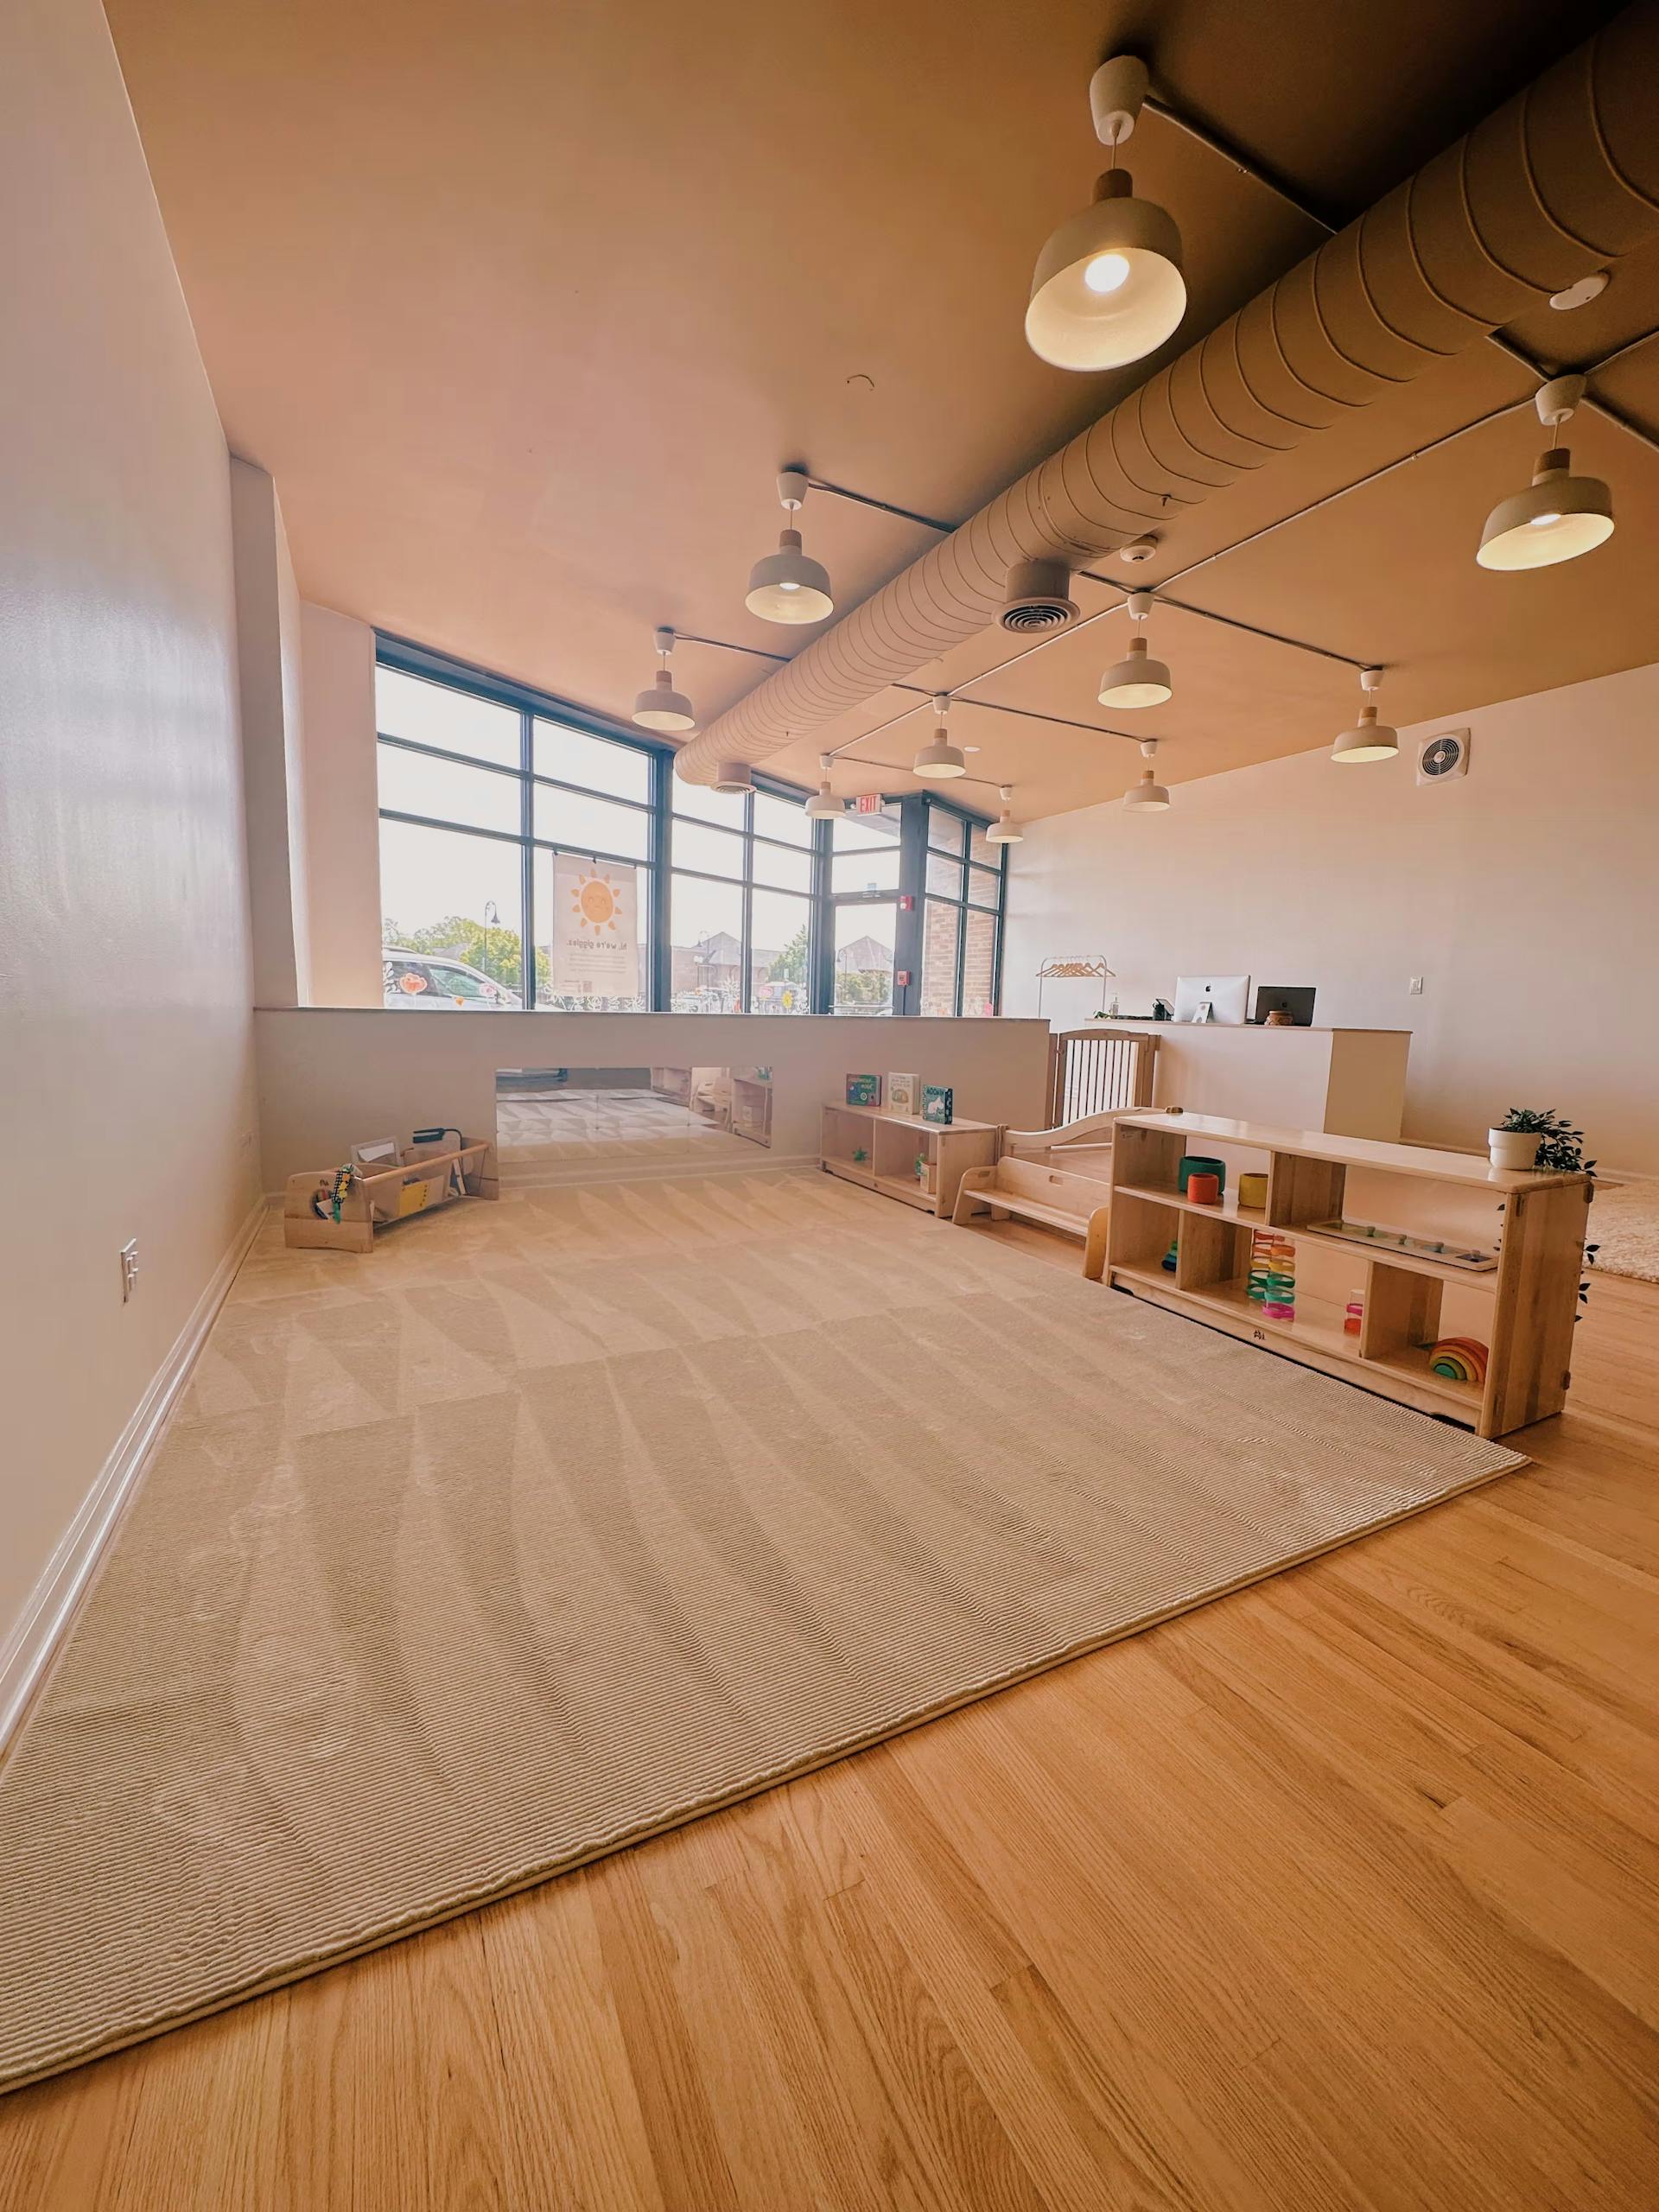 Indoor play area for toddlers